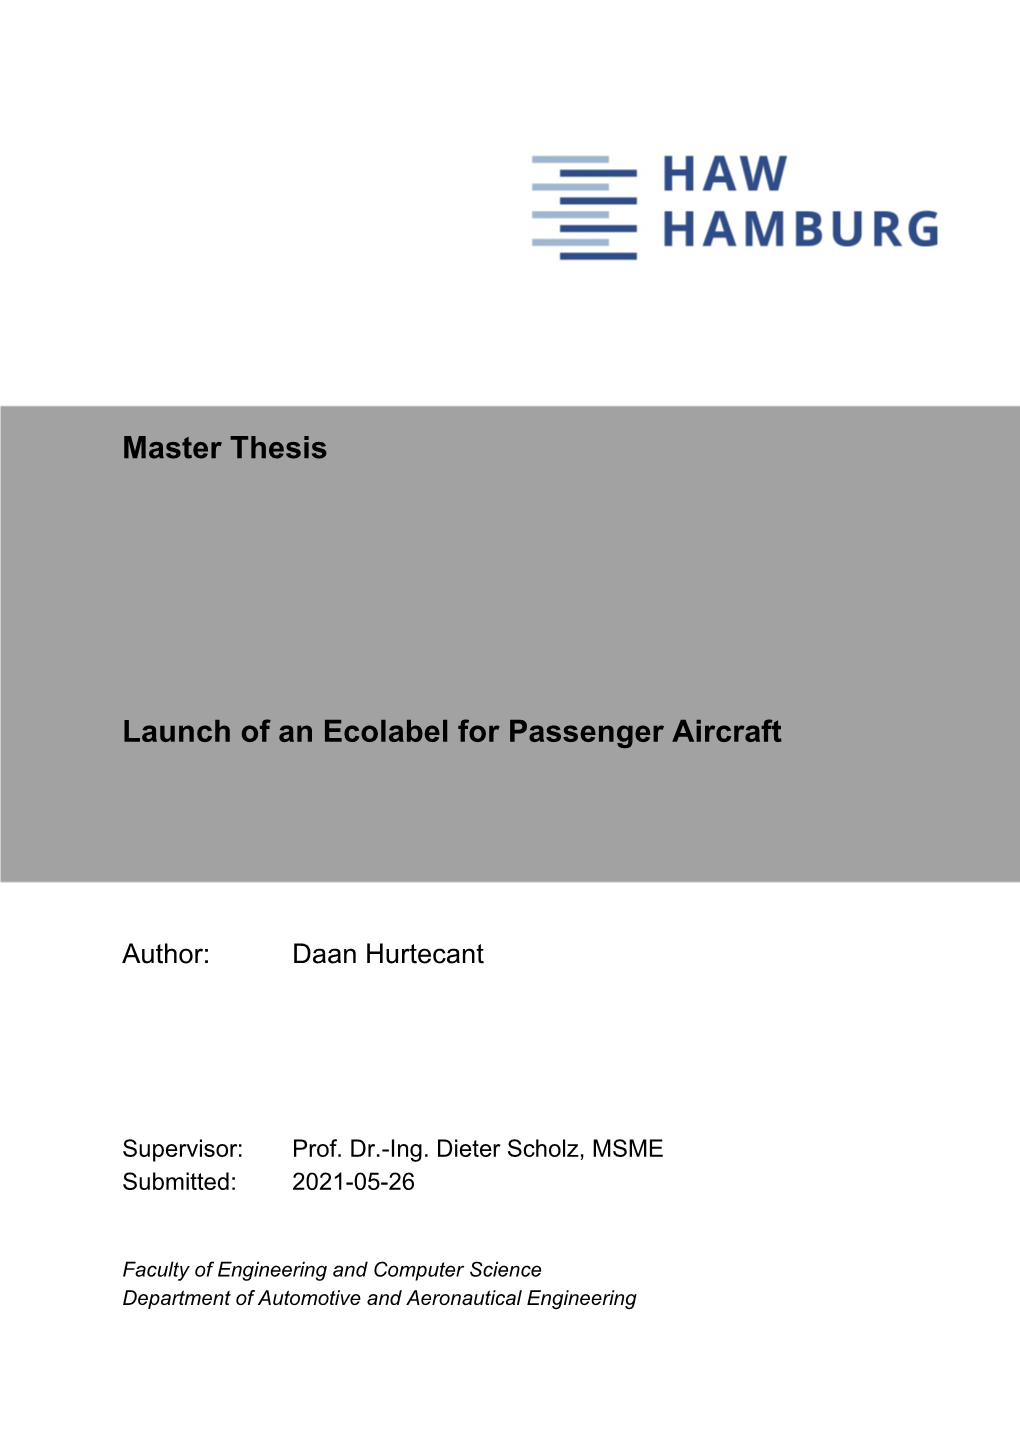 Launch of an Ecolabel for Passenger Aircraft